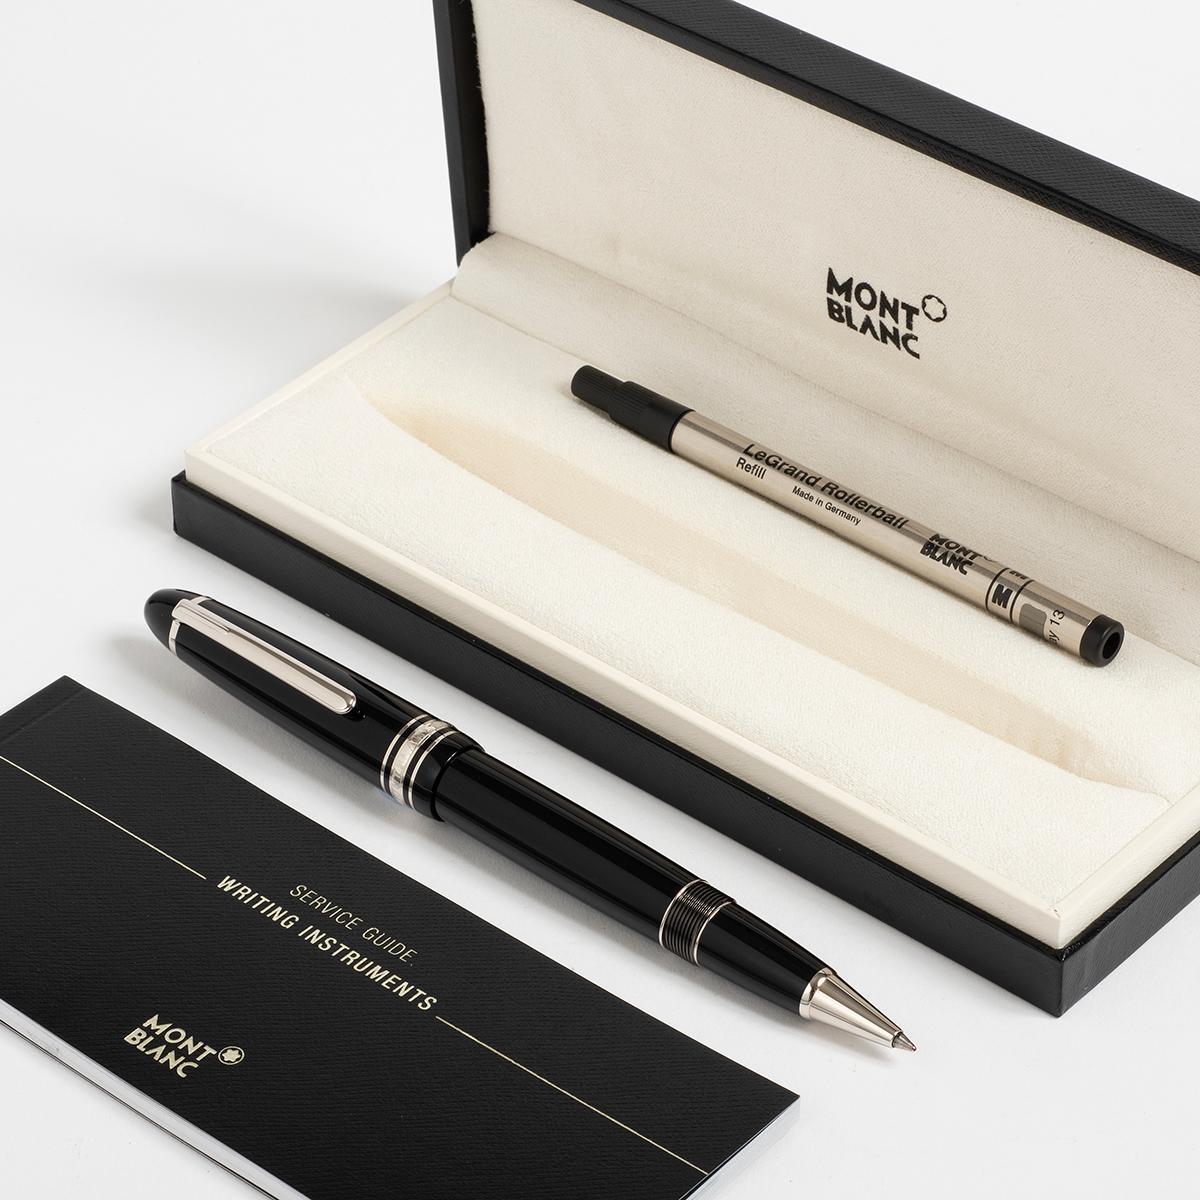 Our MontBlanc Meisterstuck Le Grand roller ball is presented in excellent condition with only light signs of use from new, featuring a black resin barrel and cap with platinum coated clip. This is the largest Meisterstuck rollerball, weighting a